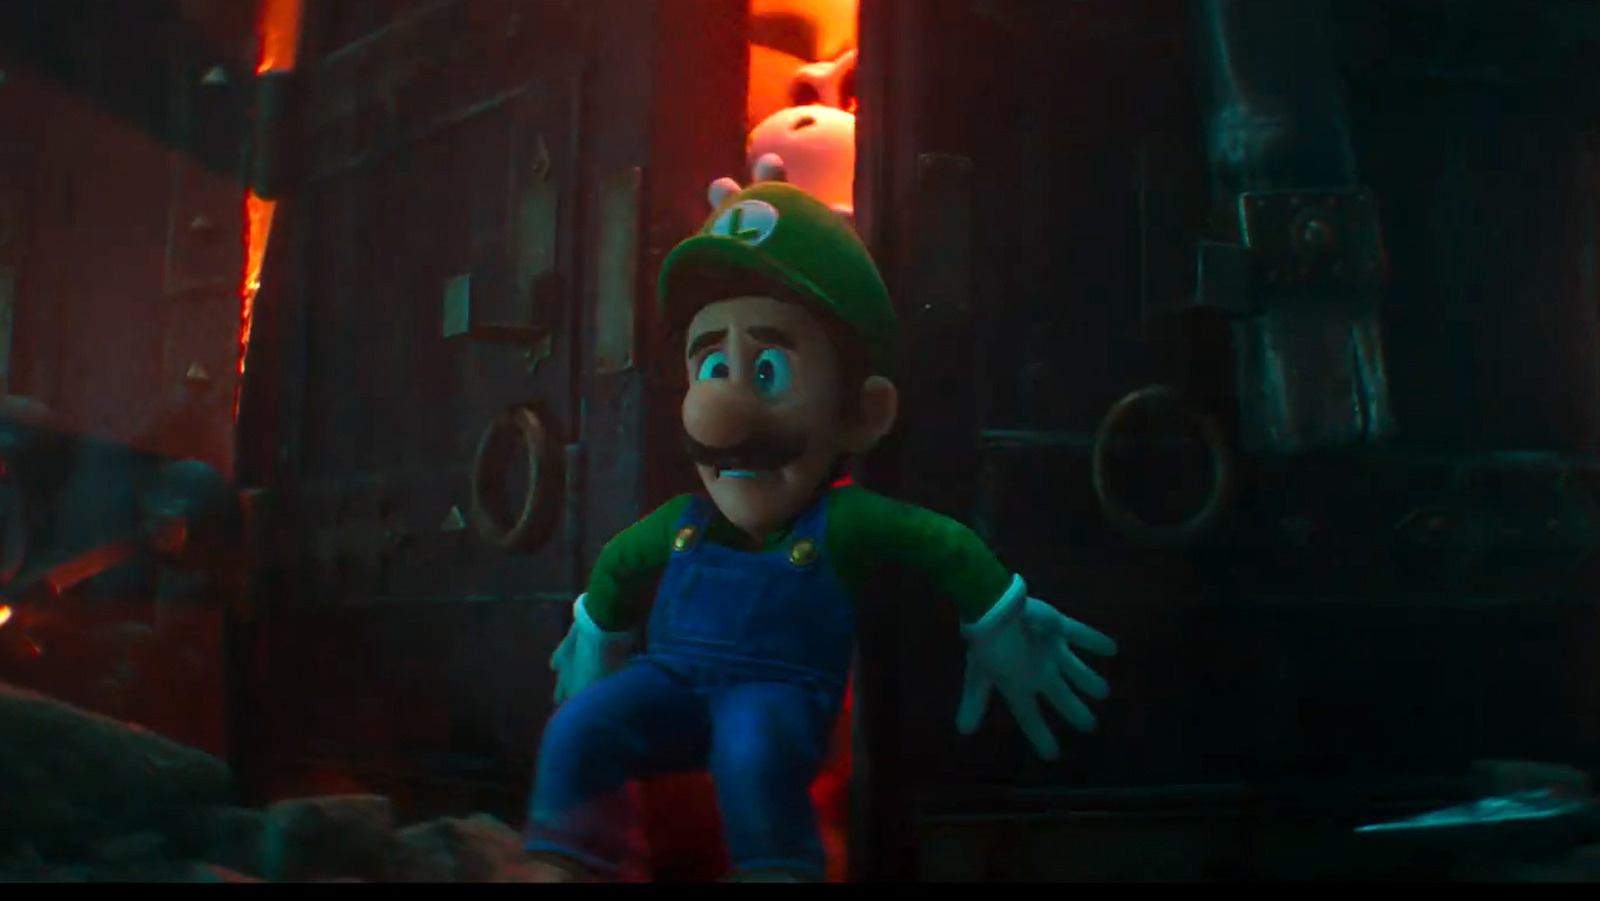 The Best Part Of The Super Mario Bros. Trailer Is The Brief Glimpse Of